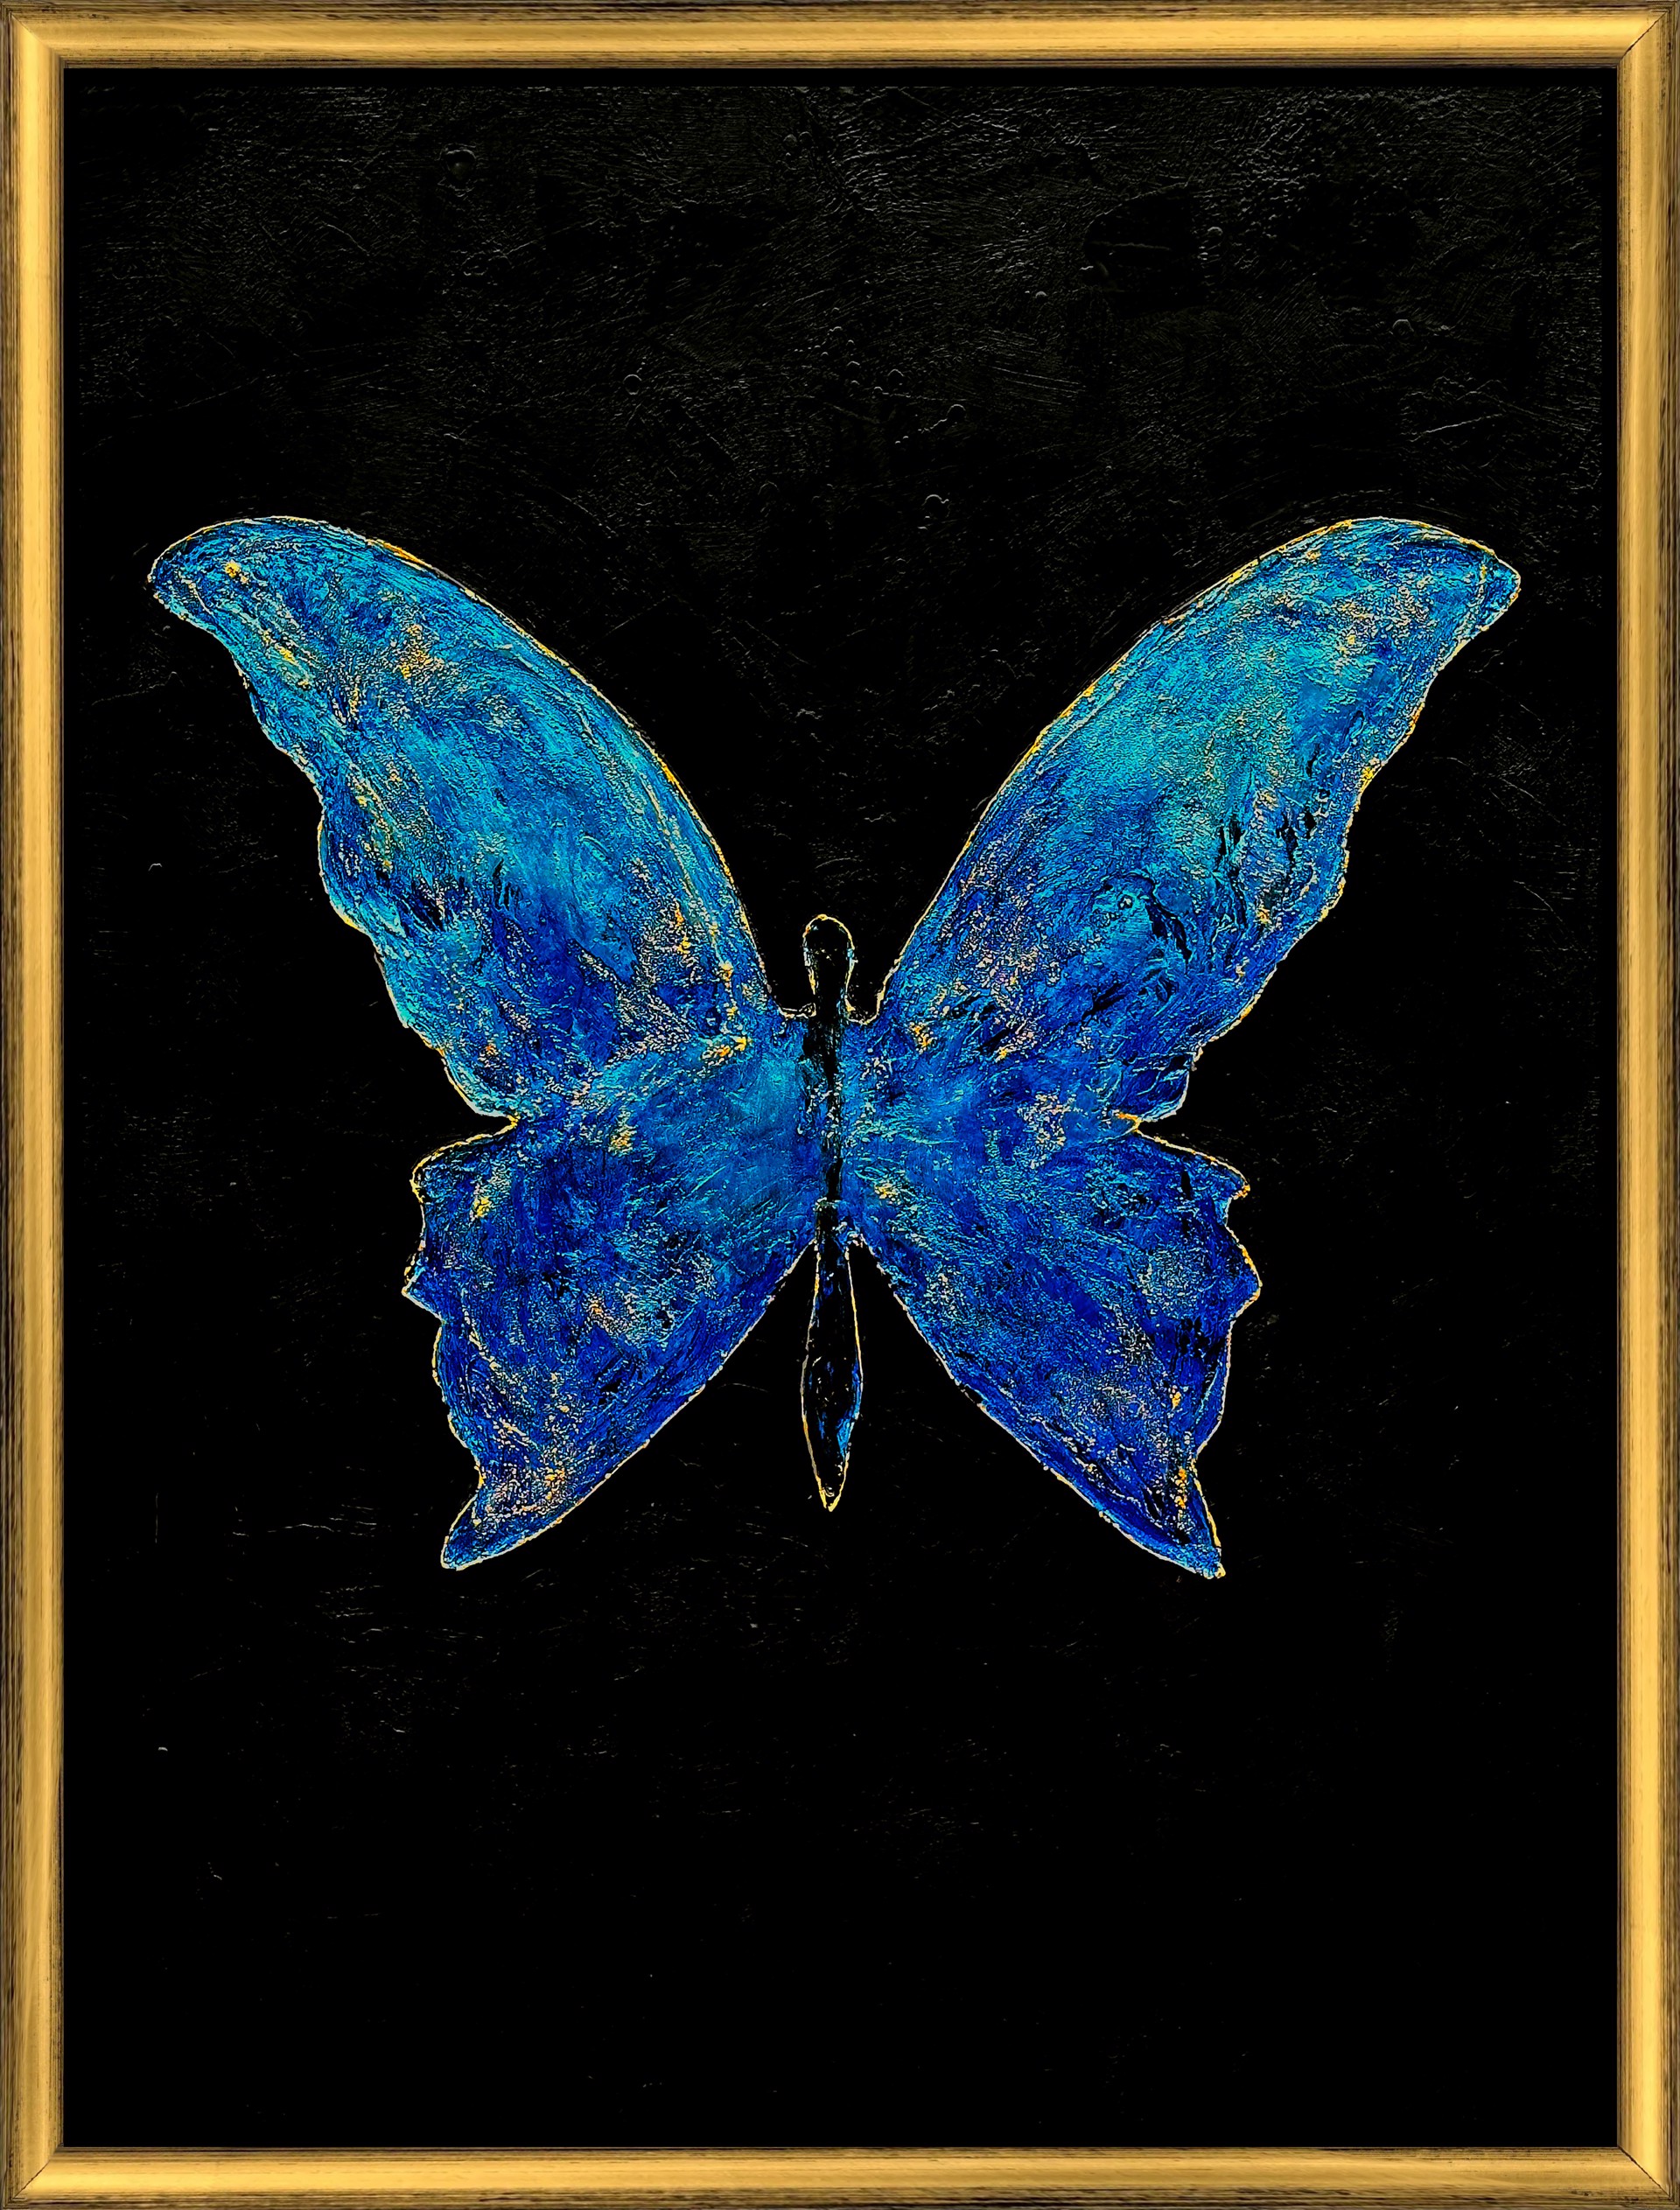 Morpho I by Meredith Pardue